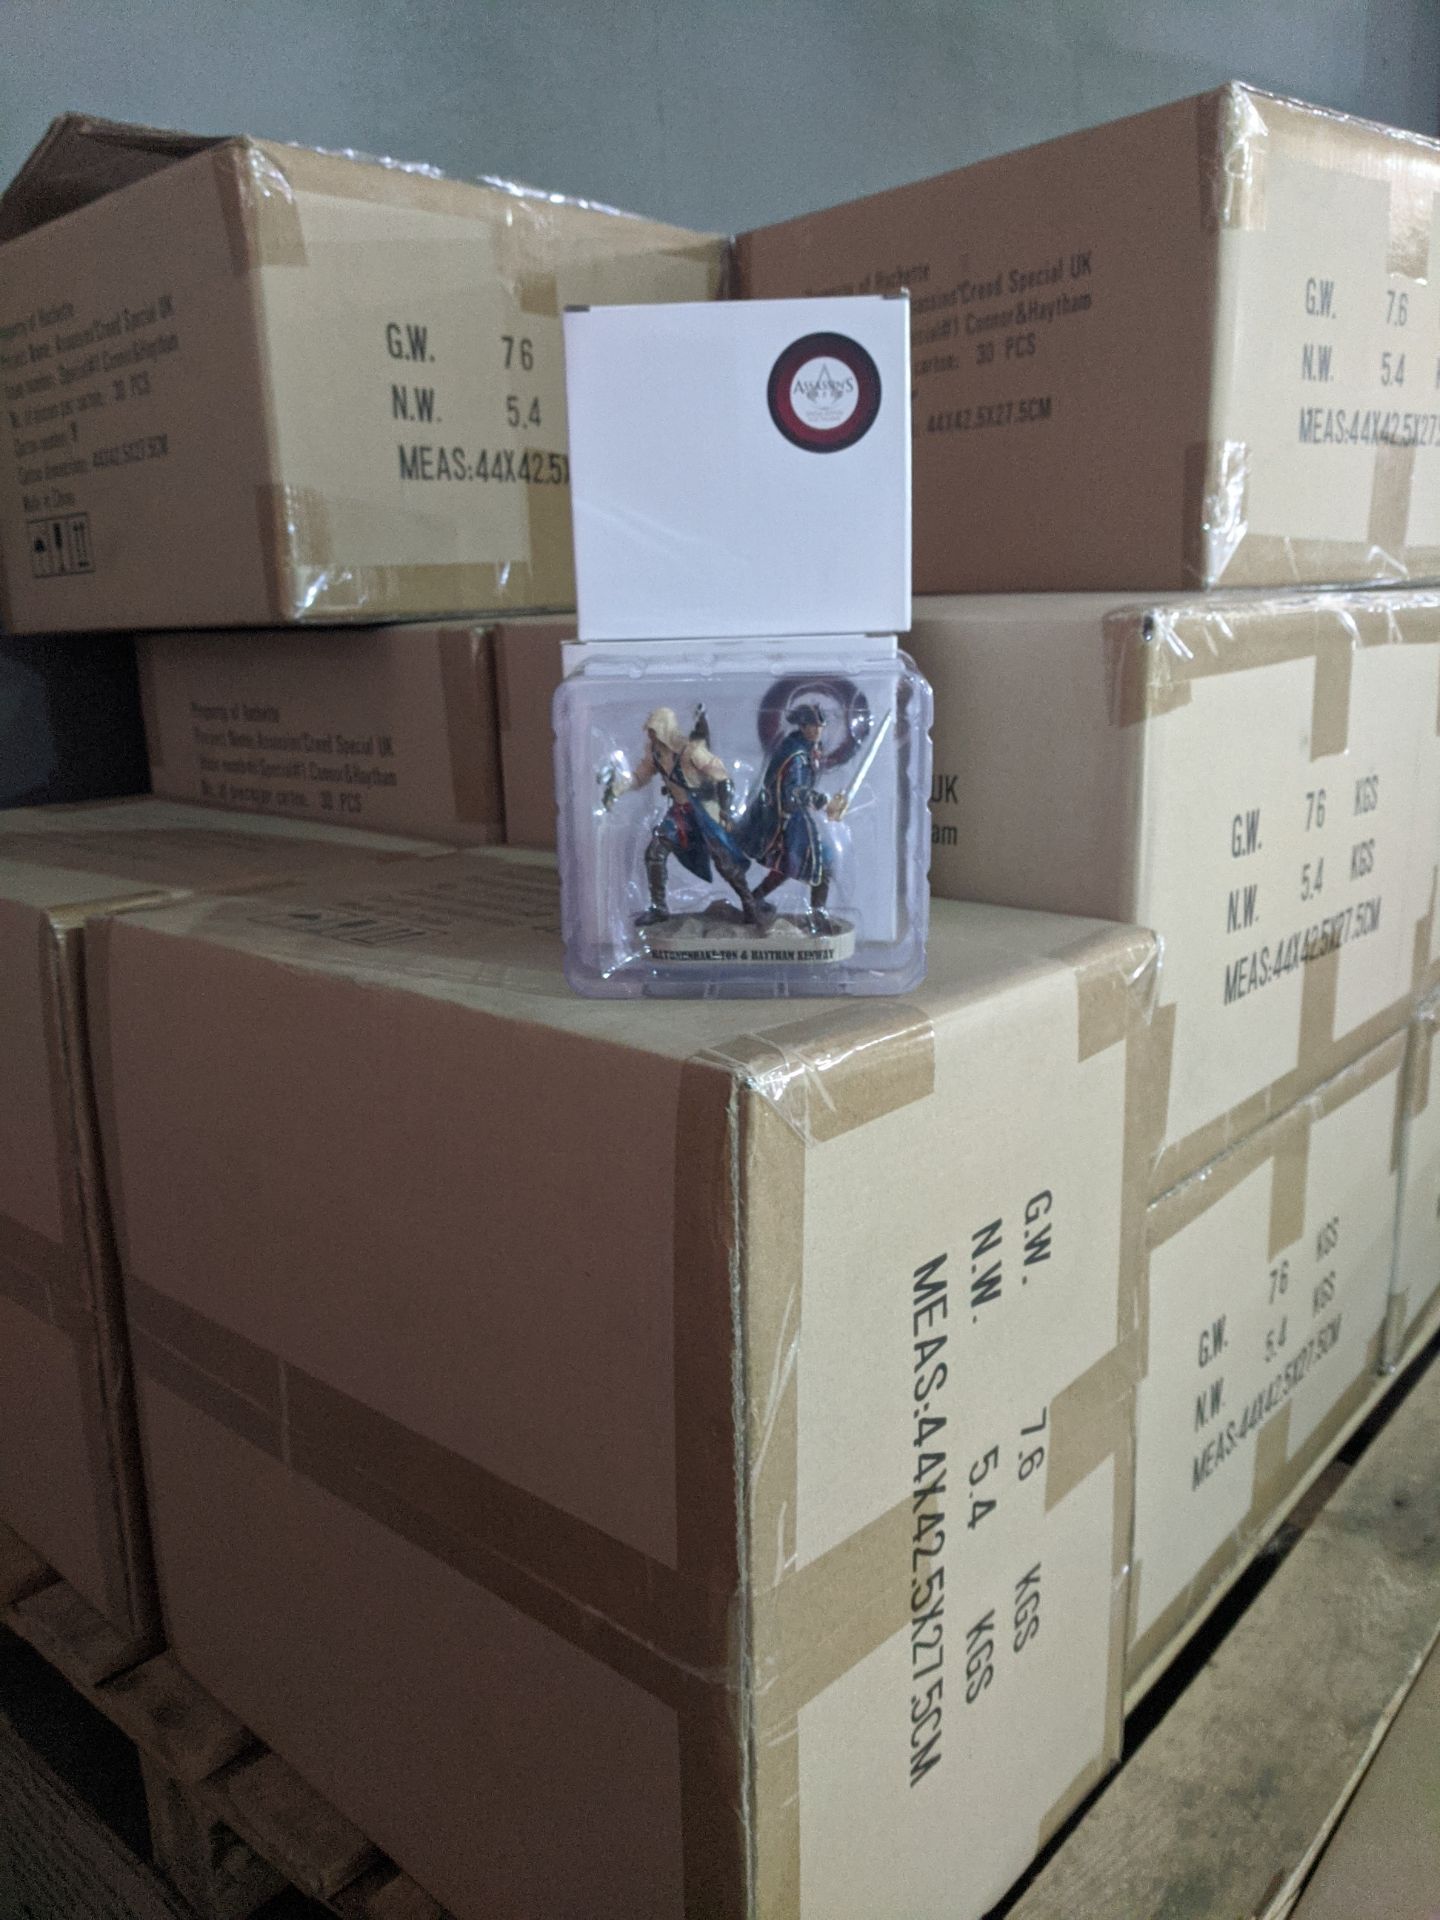 1 PALLET OF 500 NEW AND BOXED ASSASSINS CREED TWIN SET FIGURINES, COLLECTORS ITEM *PLUS VAT* - Image 2 of 3